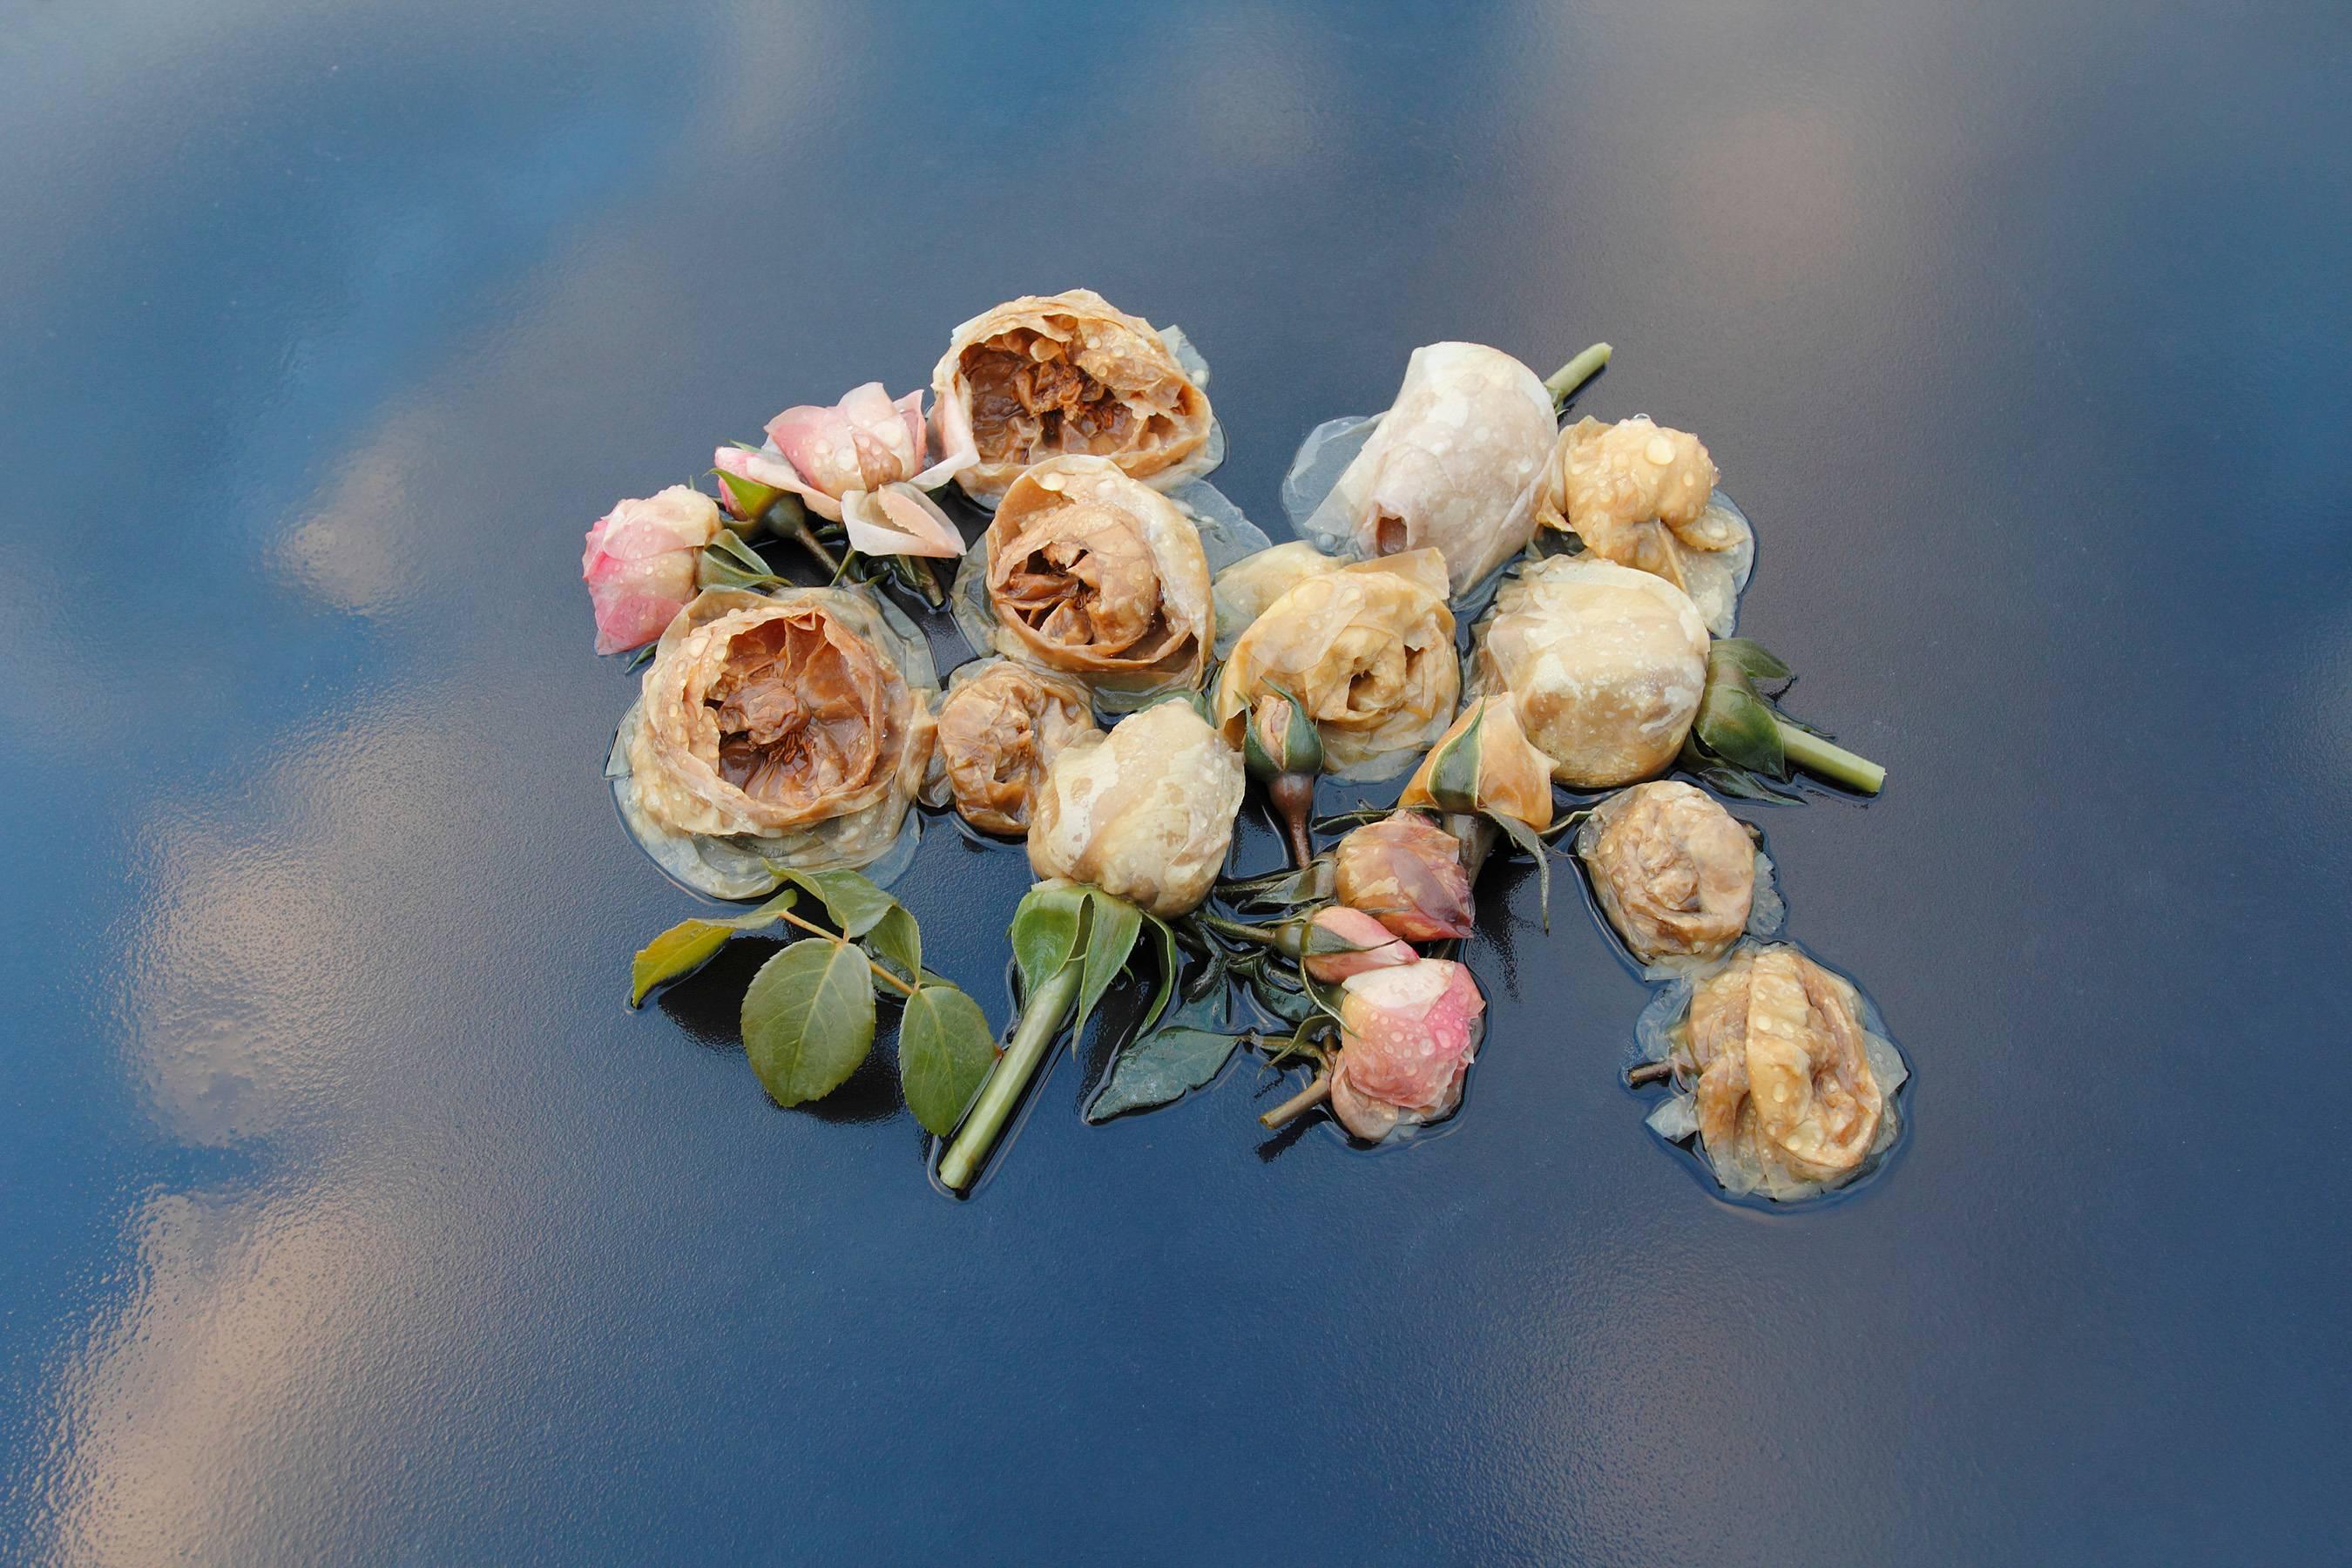 Mary Kocol Color Photograph - Roses, Table, Sky (from the Ghost Garden series)